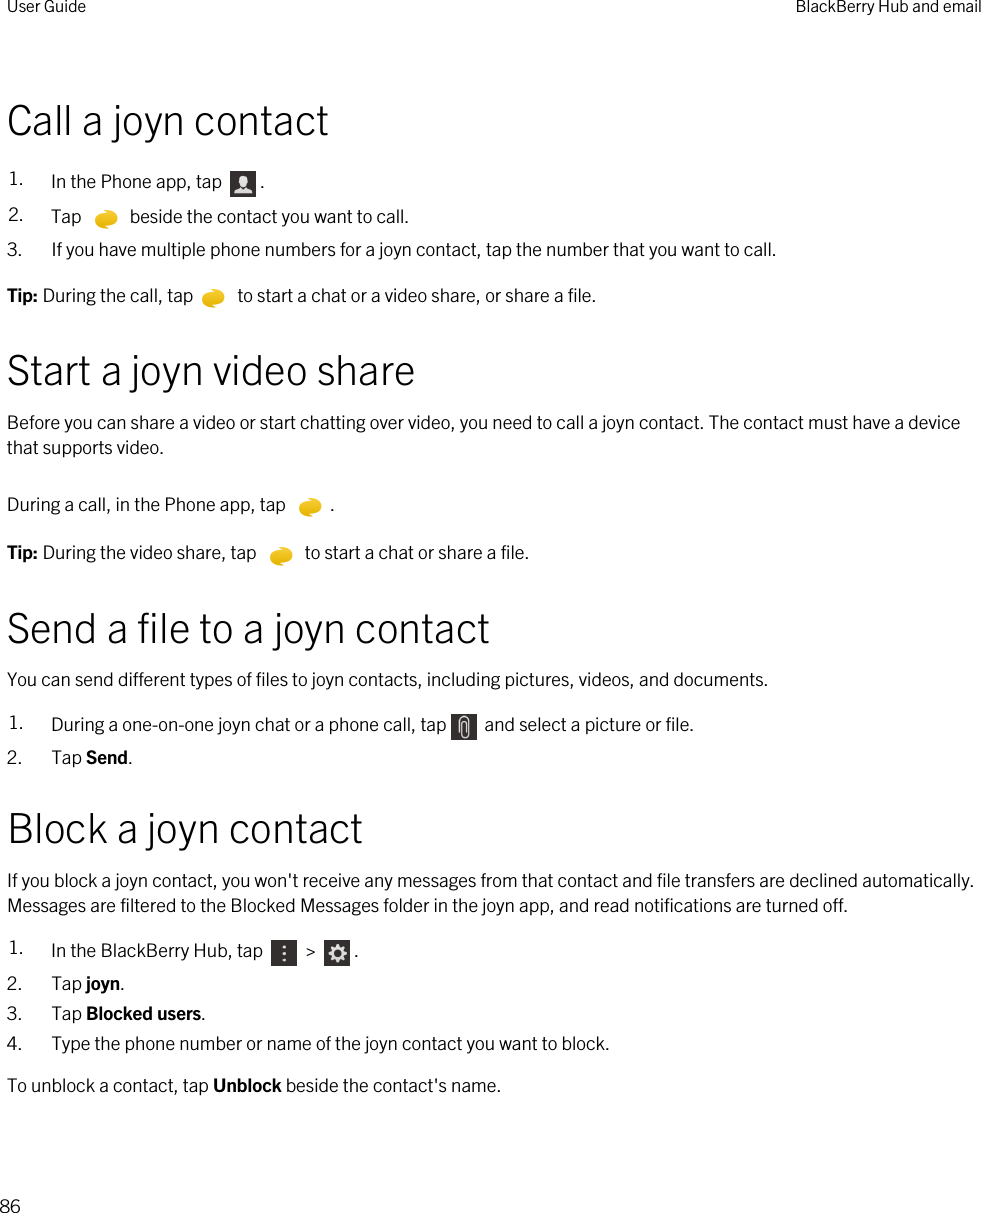 Call a joyn contact1. In the Phone app, tap  .2. Tap   beside the contact you want to call.3. If you have multiple phone numbers for a joyn contact, tap the number that you want to call.Tip: During the call, tap  to start a chat or a video share, or share a file.Start a joyn video shareBefore you can share a video or start chatting over video, you need to call a joyn contact. The contact must have a device that supports video.During a call, in the Phone app, tap  . Tip: During the video share, tap   to start a chat or share a file.Send a file to a joyn contactYou can send different types of files to joyn contacts, including pictures, videos, and documents.1. During a one-on-one joyn chat or a phone call, tap  and select a picture or file.2. Tap Send.Block a joyn contactIf you block a joyn contact, you won&apos;t receive any messages from that contact and file transfers are declined automatically. Messages are filtered to the Blocked Messages folder in the joyn app, and read notifications are turned off.1. In the BlackBerry Hub, tap   &gt;  . 2. Tap joyn.3. Tap Blocked users.4. Type the phone number or name of the joyn contact you want to block.To unblock a contact, tap Unblock beside the contact&apos;s name.User Guide BlackBerry Hub and email86